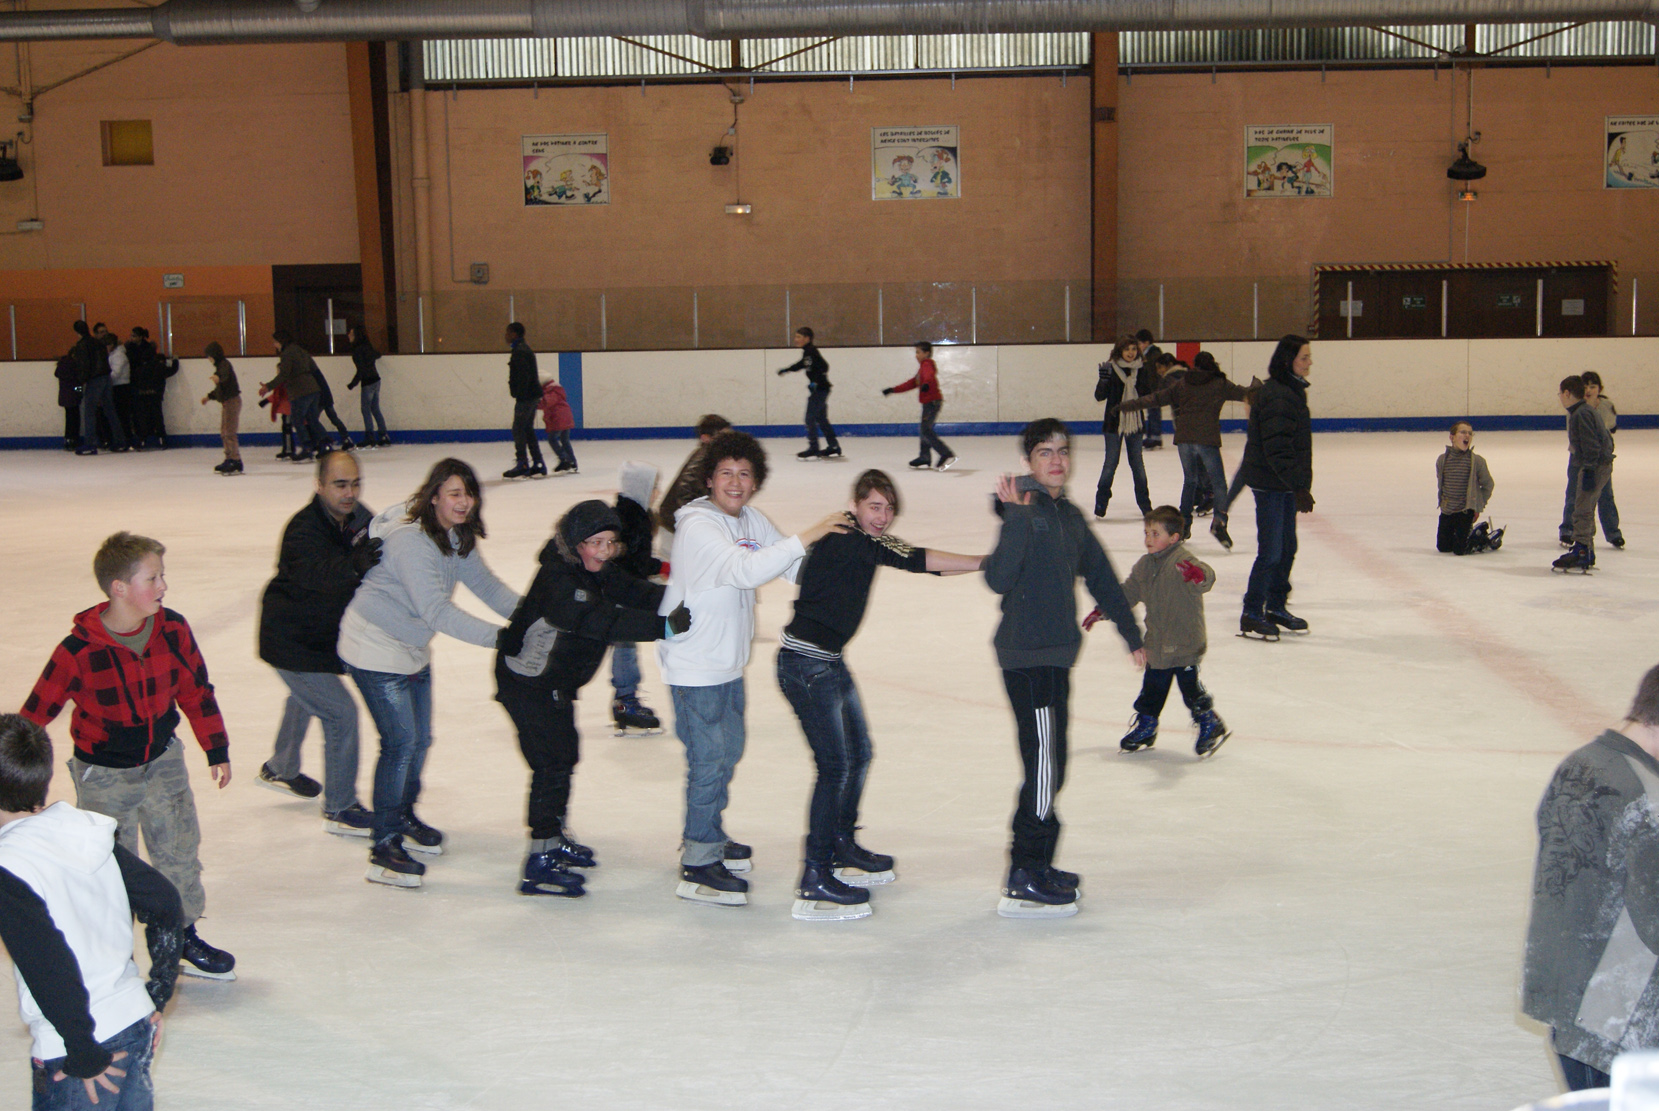 patinoire_soiree_hiver_002.JPG